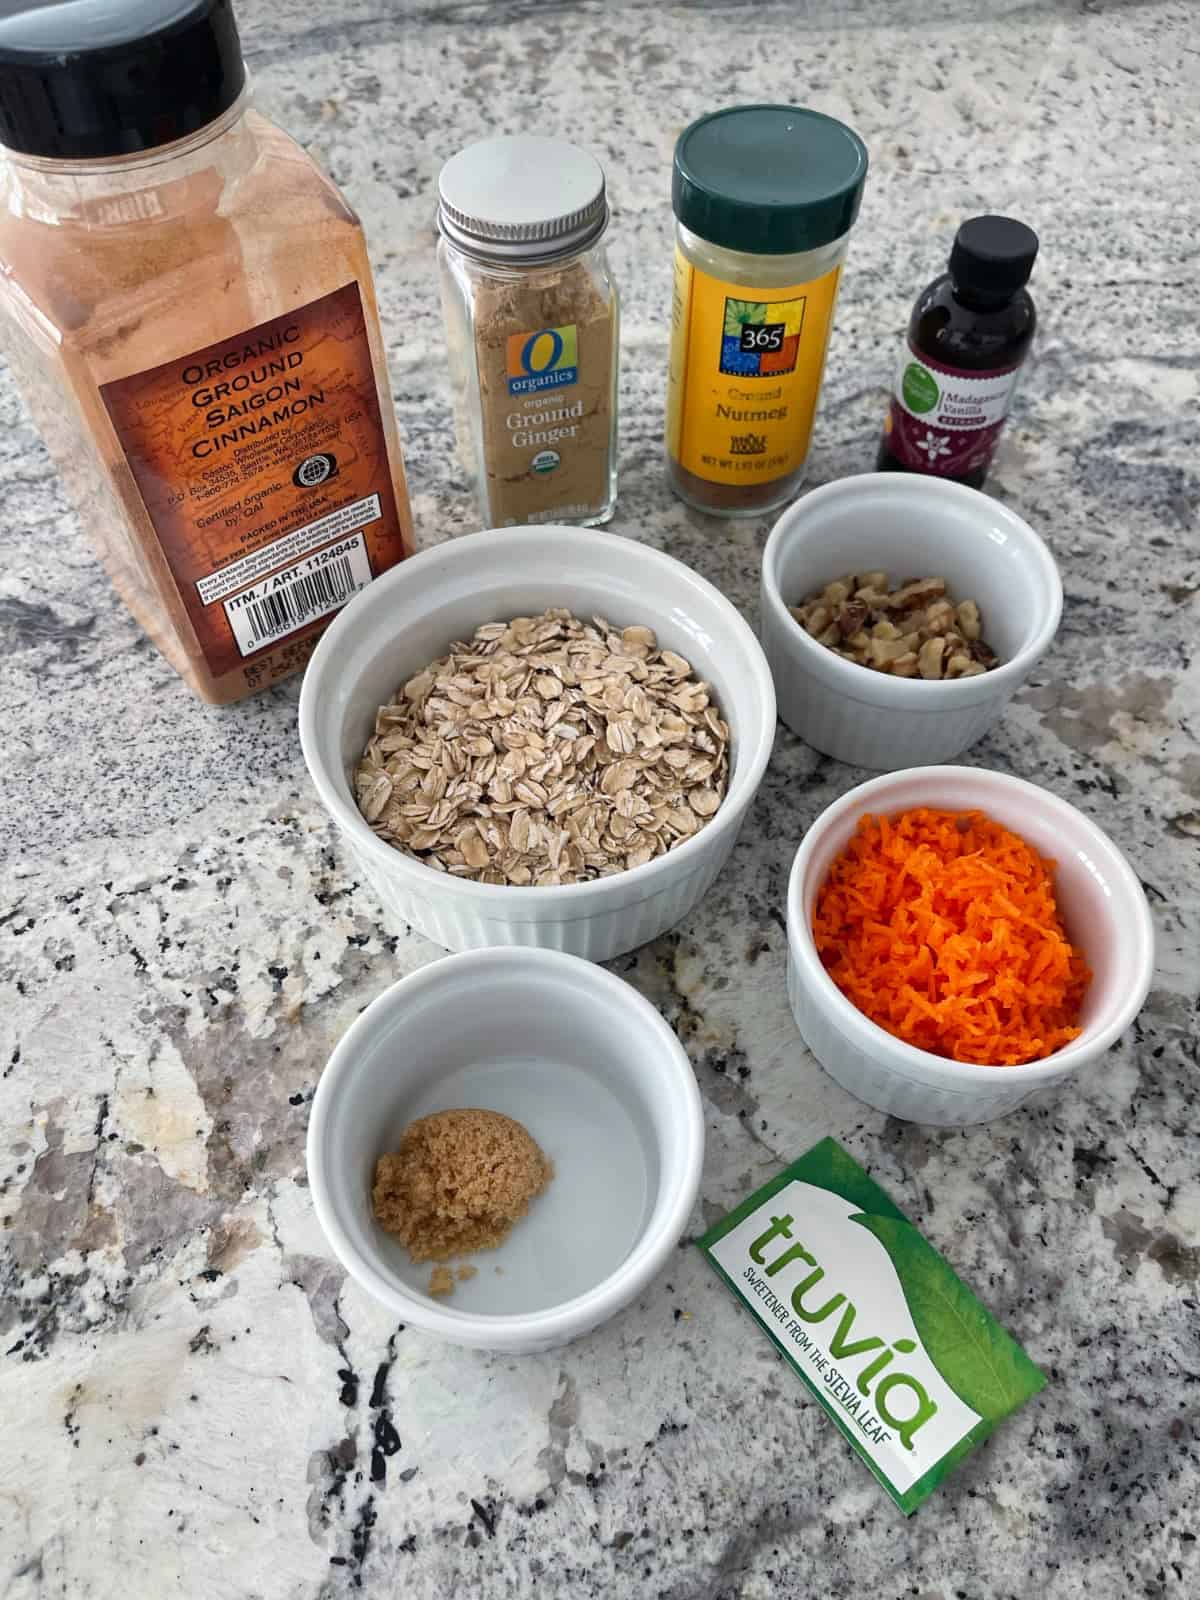 Rolled oats, shredded carrots, chopped walnuts, Truvia packet, brown sugar, ground cinnamon, ground ginger, ground nutmeg and vanilla extract on granite counter.